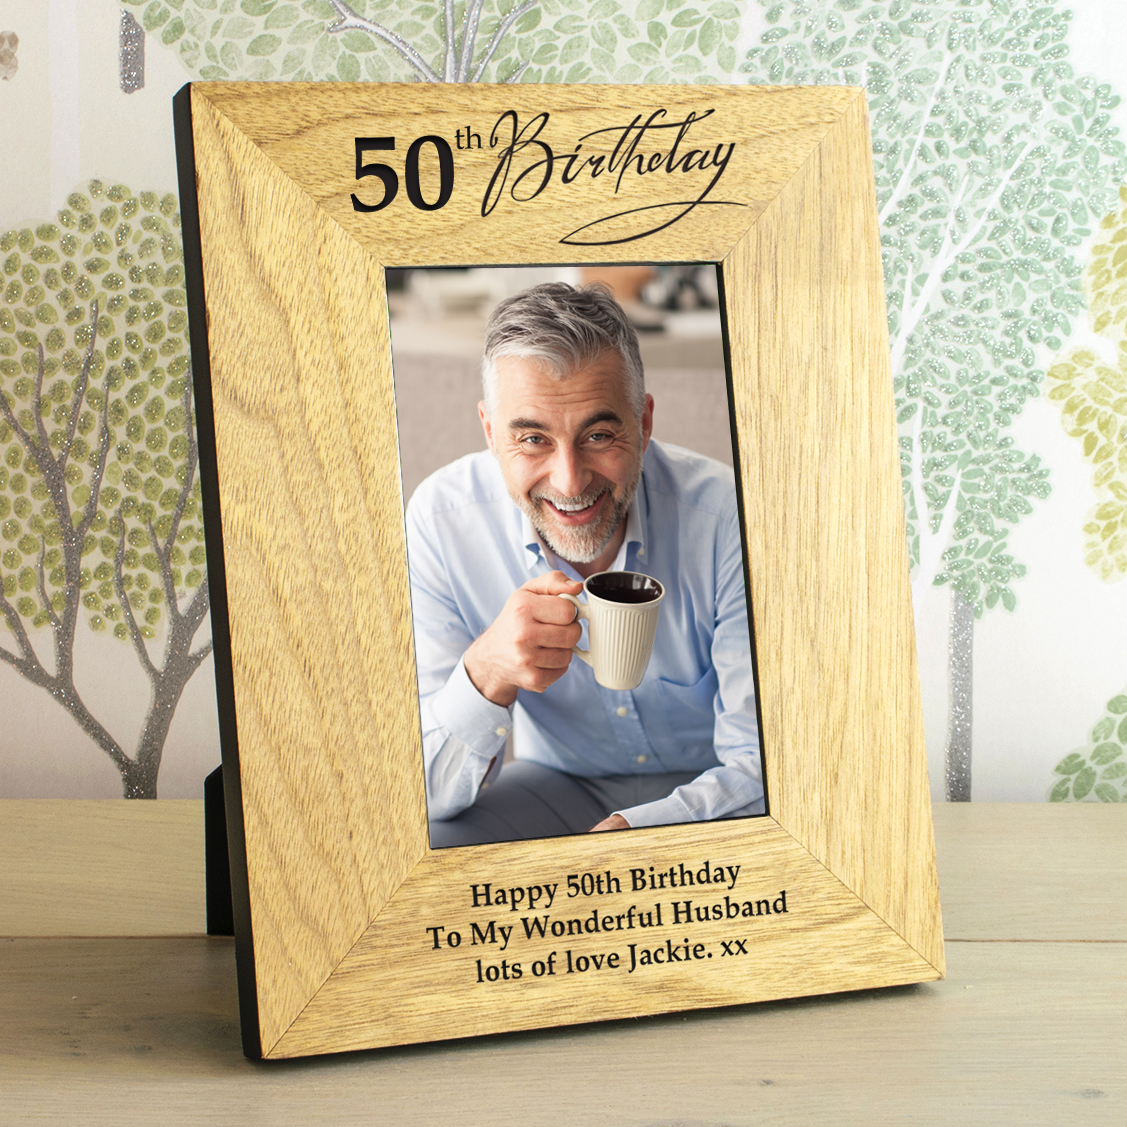 50th Birthday Wooden Personalised Photo Frame | The Gift Experience